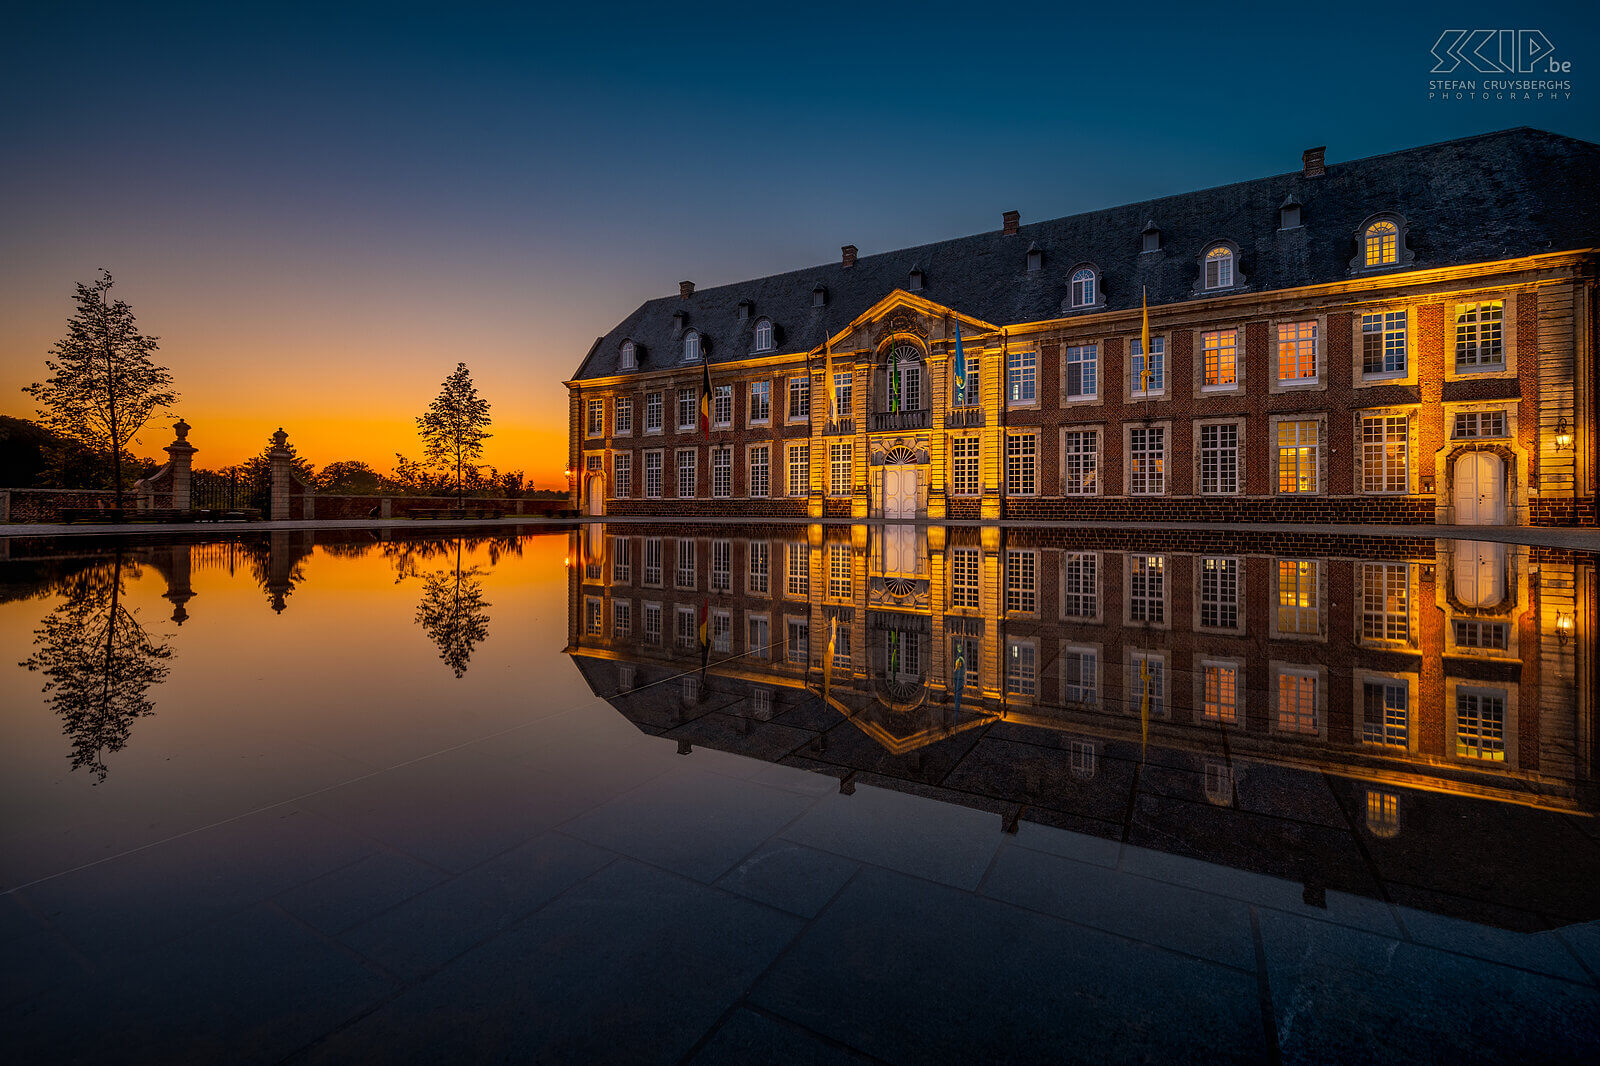 Hageland by night - Abbey of Averbode A beautiful glow of the sun that has already set on the mirror-square at the Abbey of Averbode, a Norbertine abbey that was founded around 1134. Stefan Cruysberghs